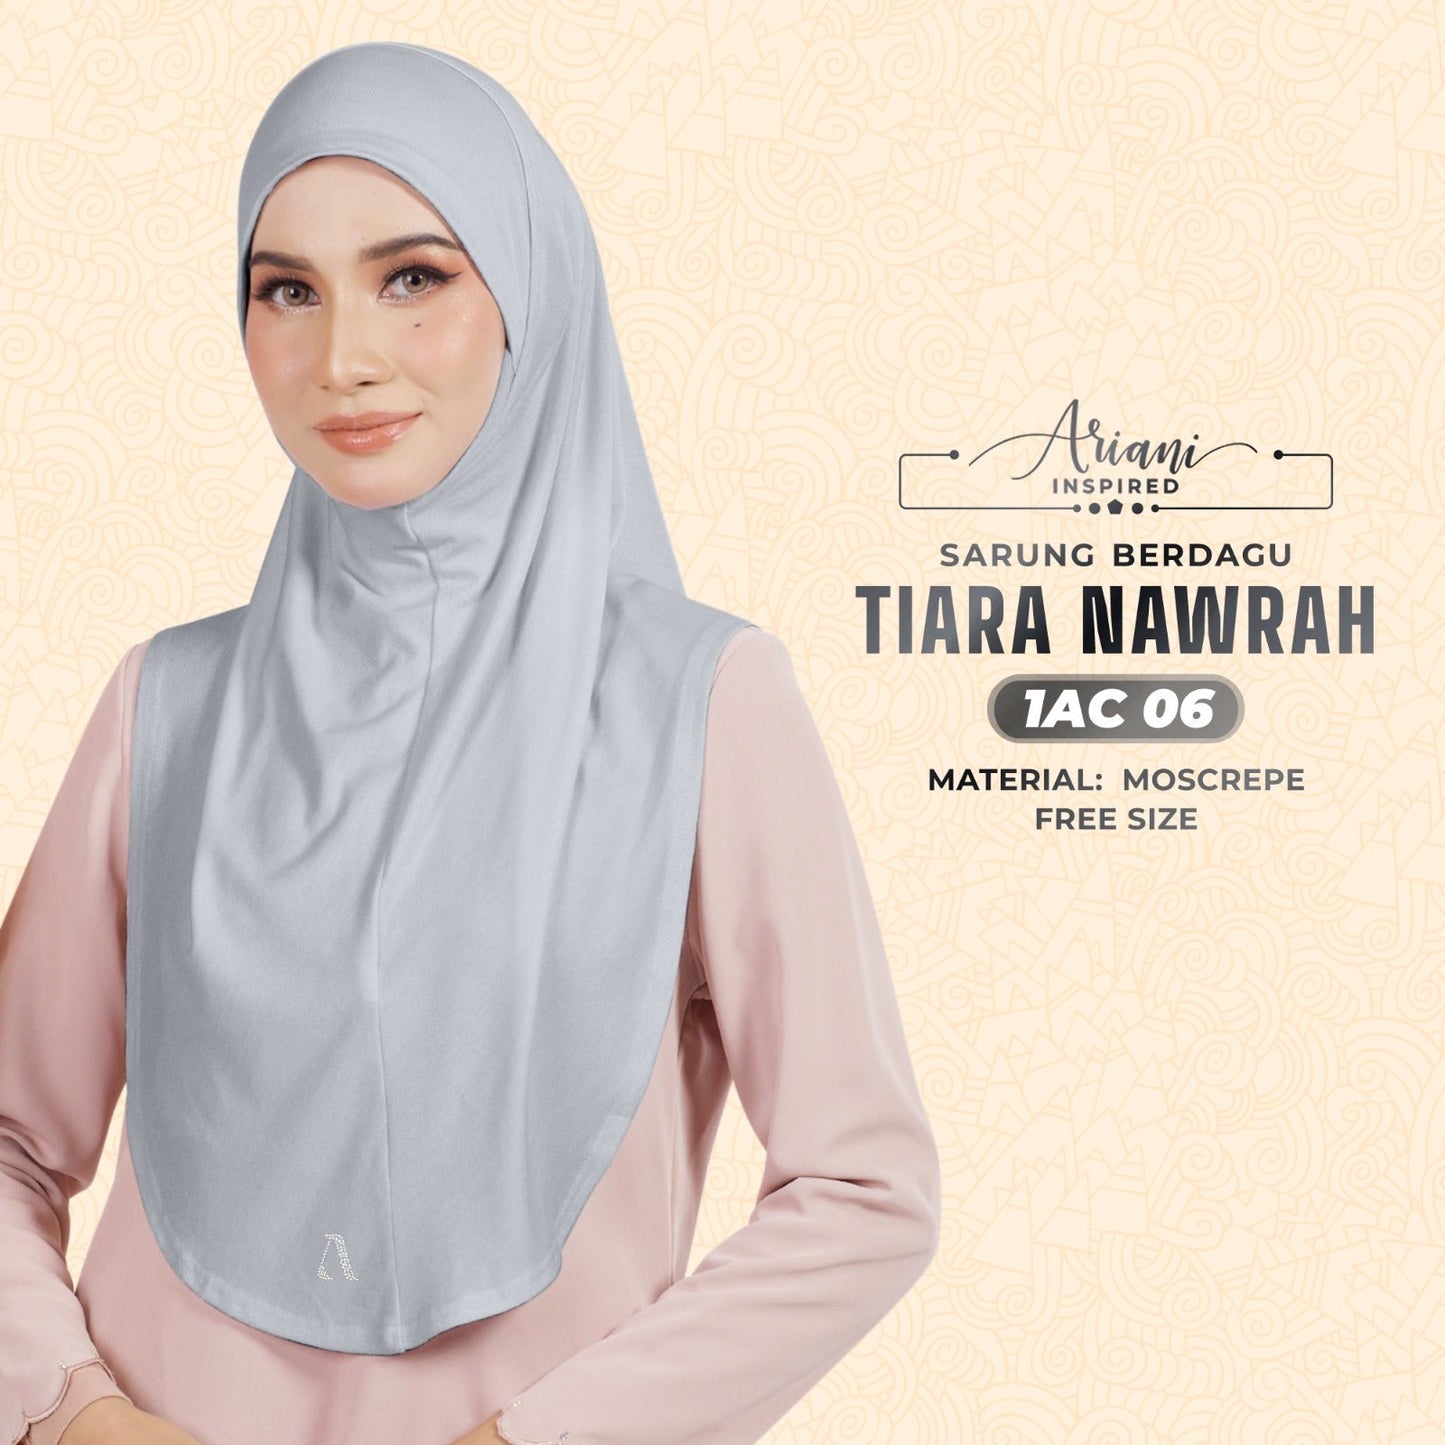 Ariani Inspired Tiara Nawrah Plain Instant Collection